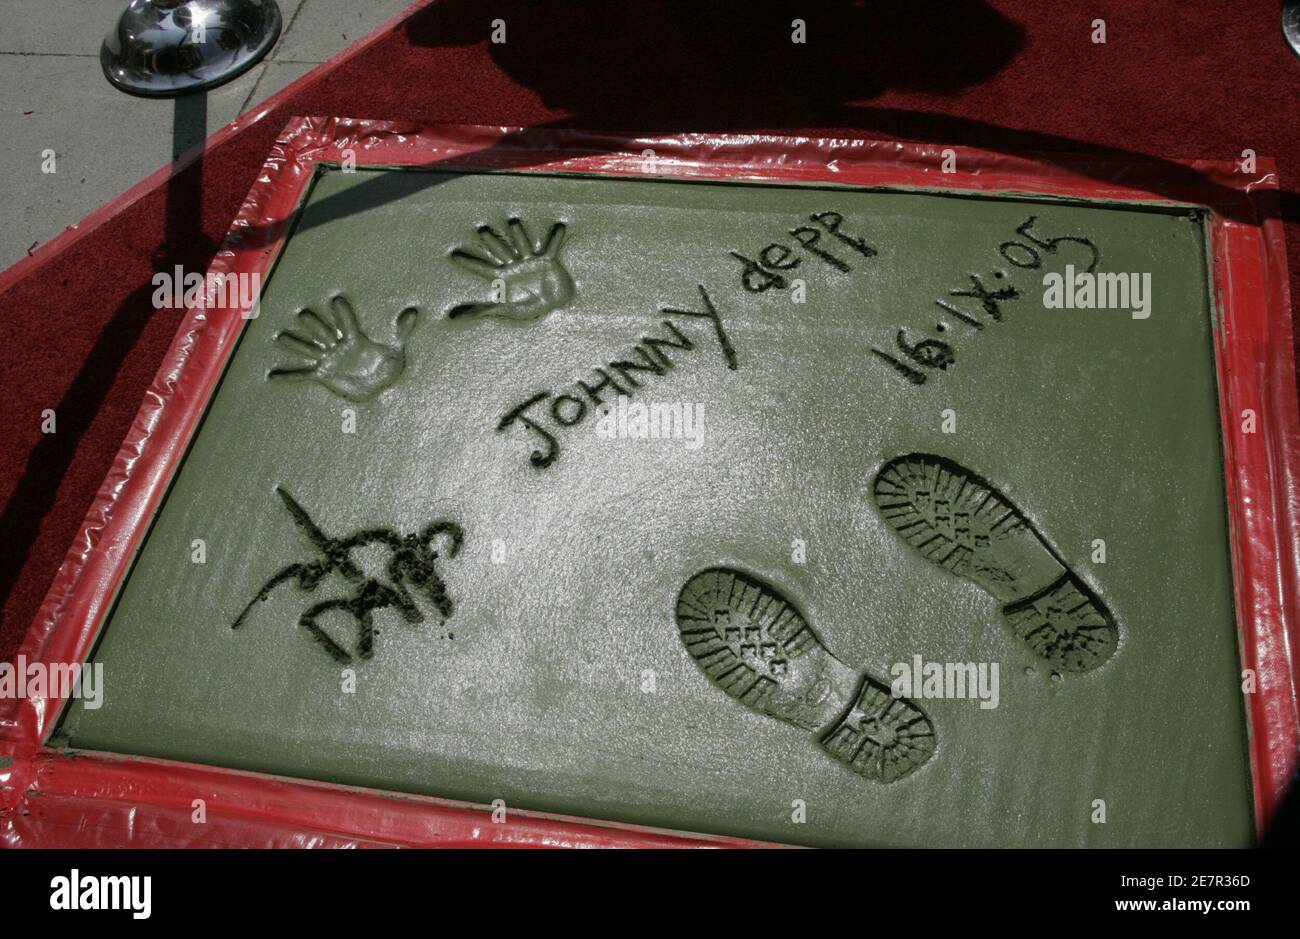 Actor Johnny Depp's signature, handprints and footprints in cement are pictured after ceremonies at the forecourt of Grauman's Chinese Theatre in Hollywood September 16, 2005. Depp's voice is featured in the new animated film 'The Corpse Bride. Stock Photo